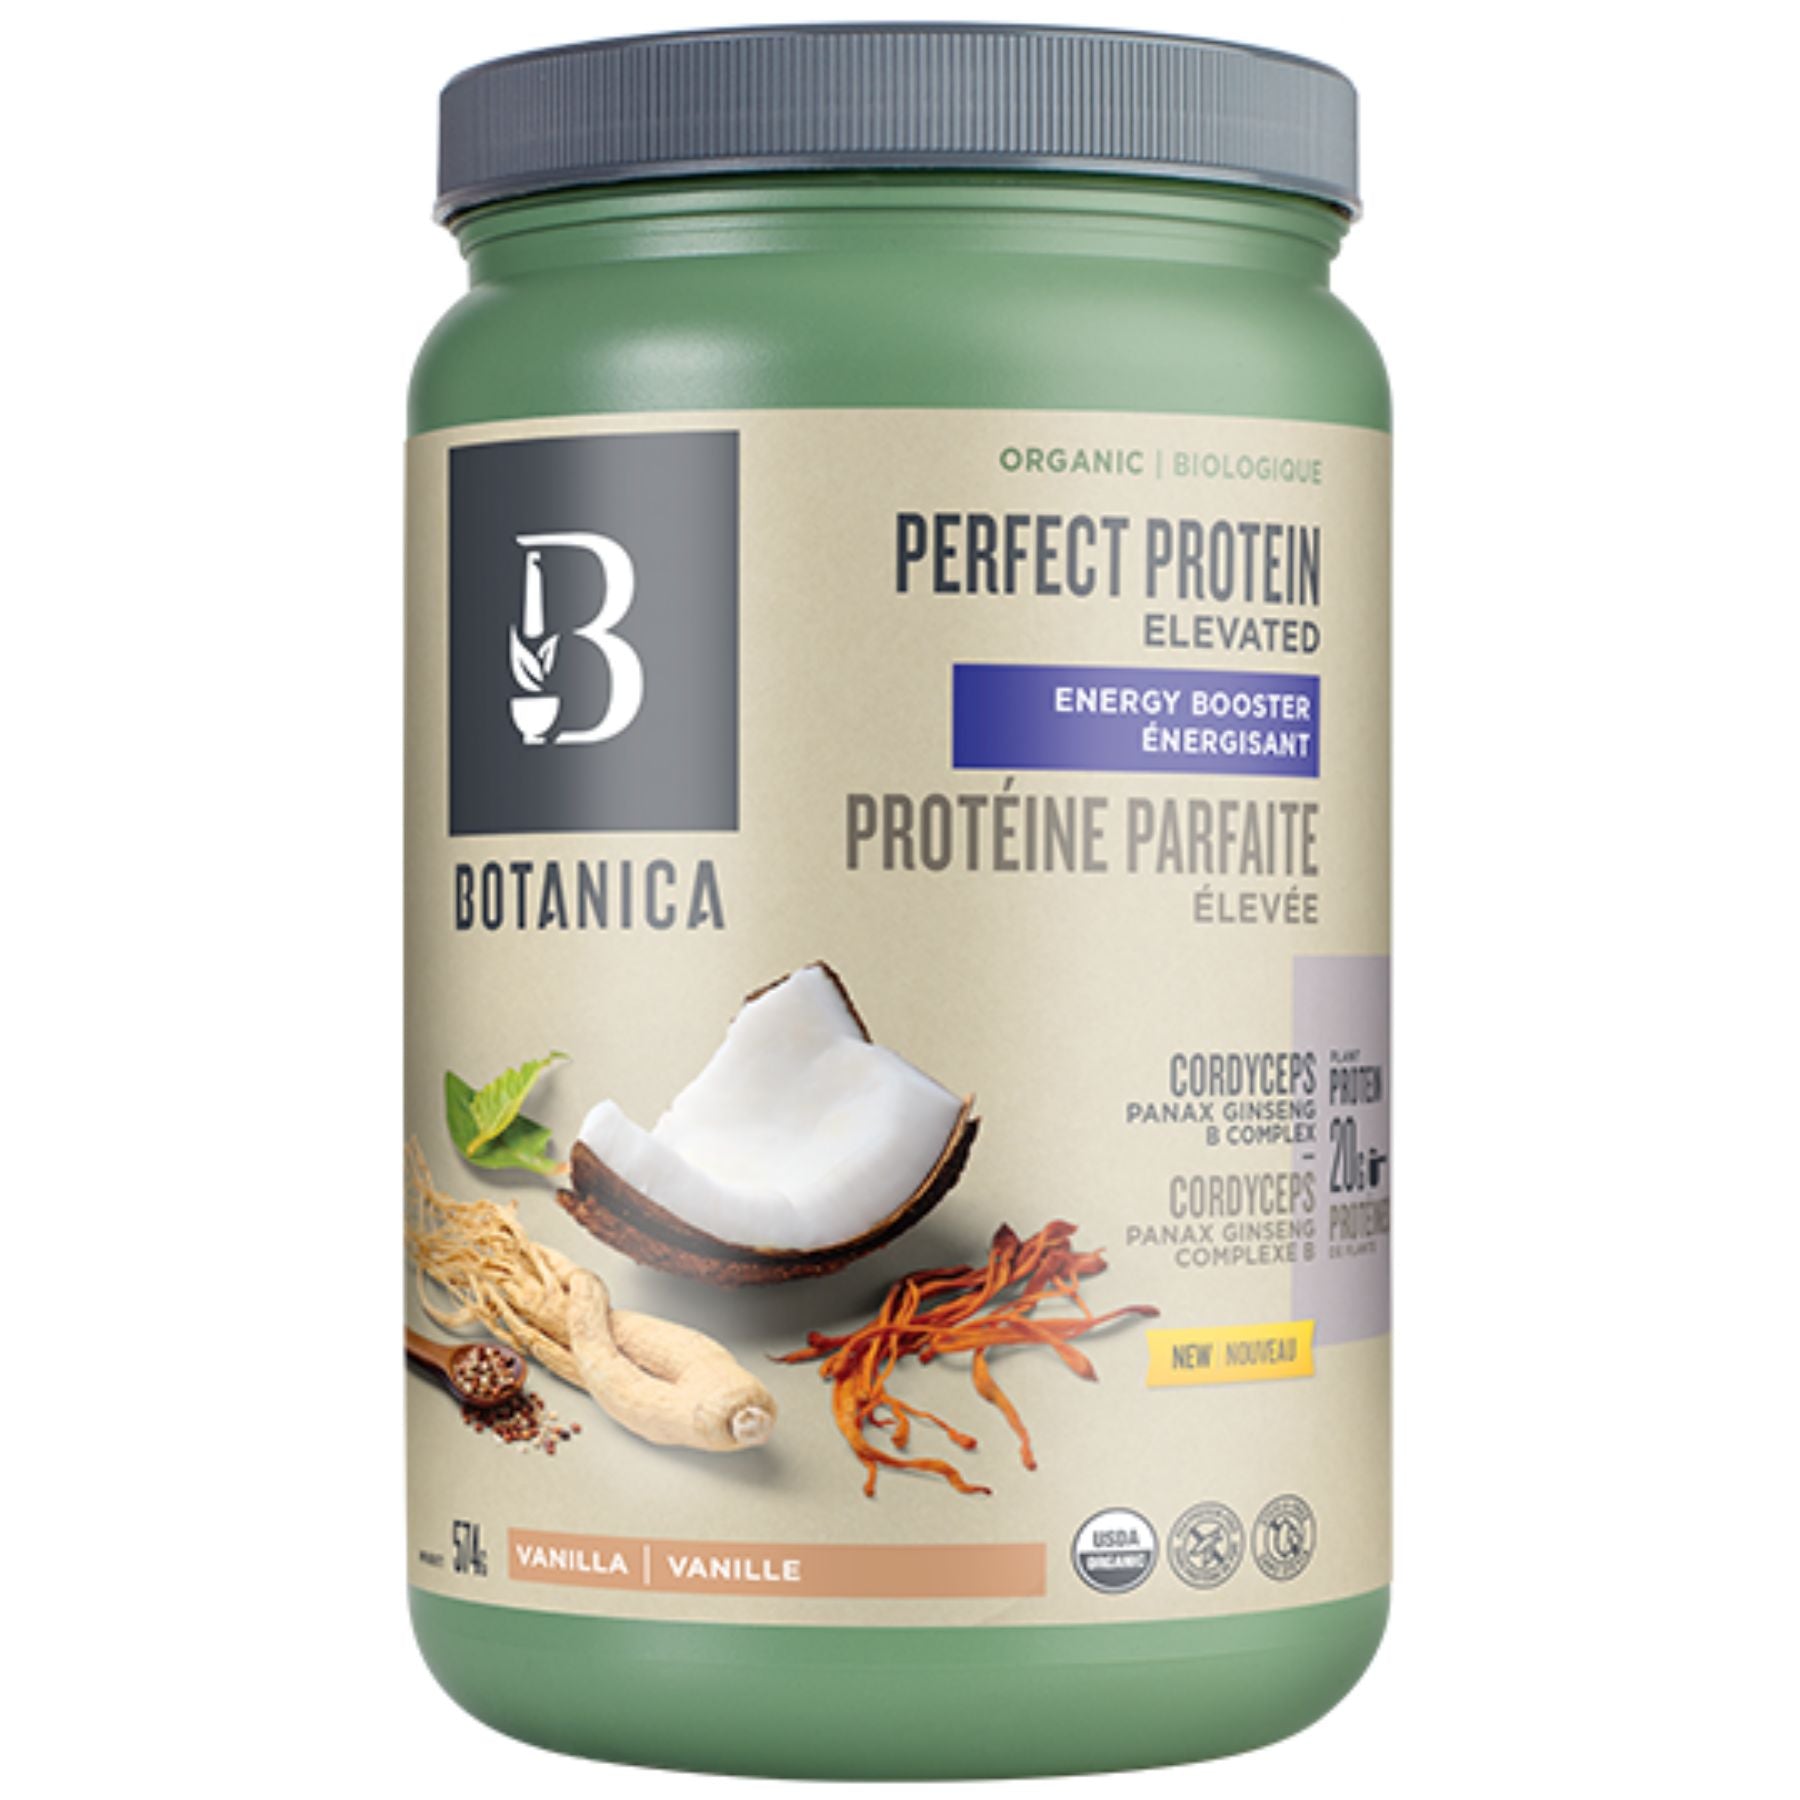 Botanic Perfect Protein Elevated Energy Booster 574g